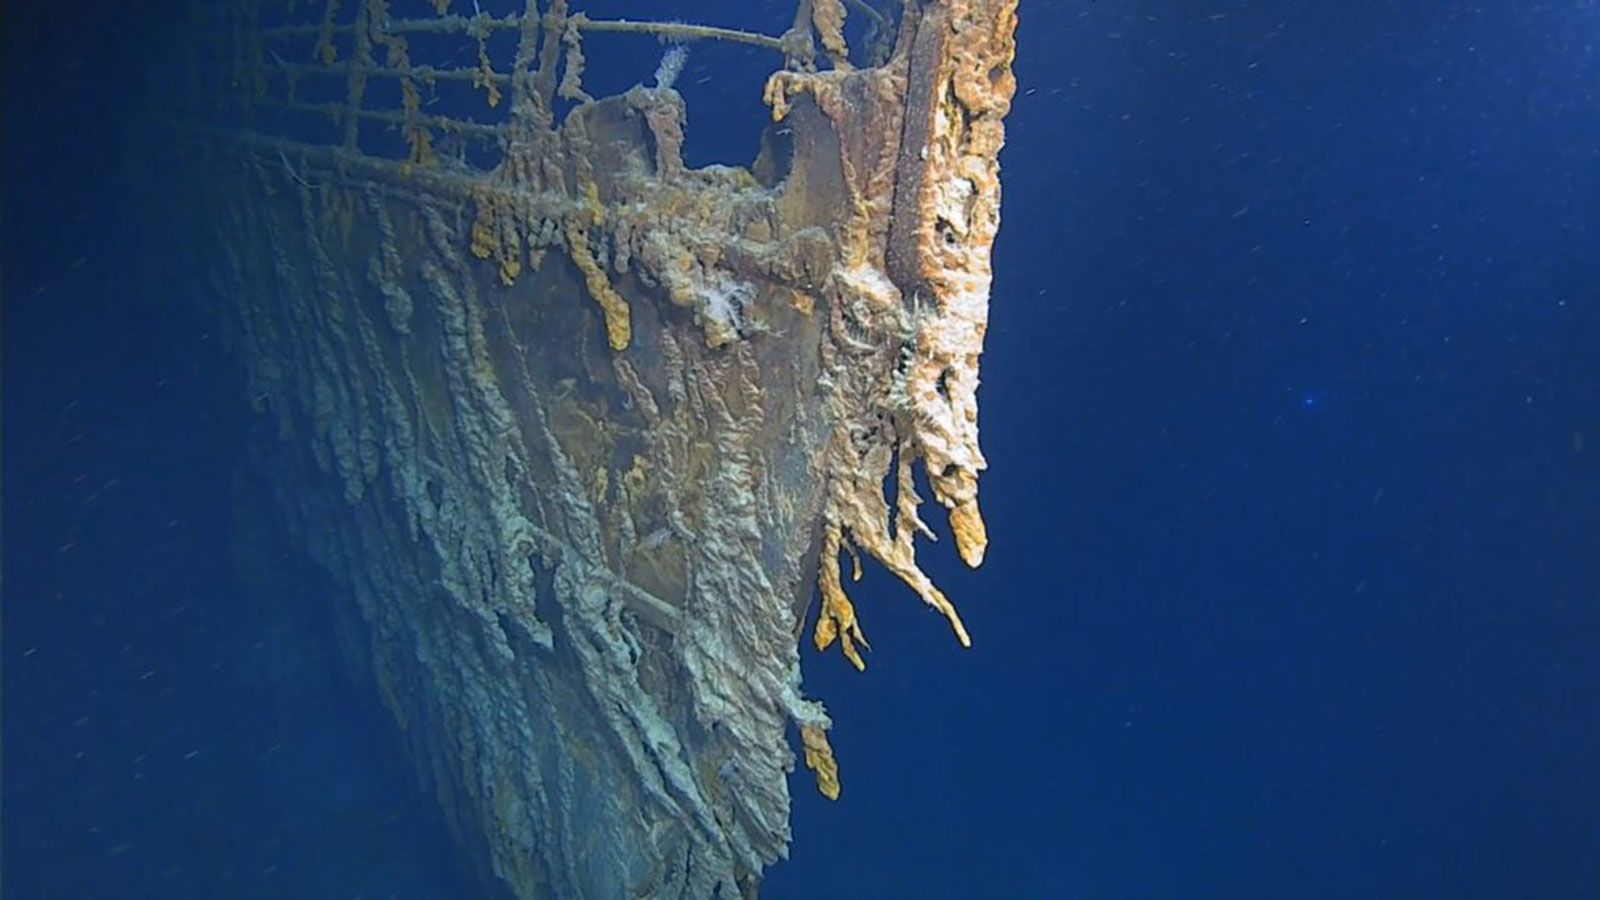 High quality film shows detail on Titanic shipwreck for 1st time